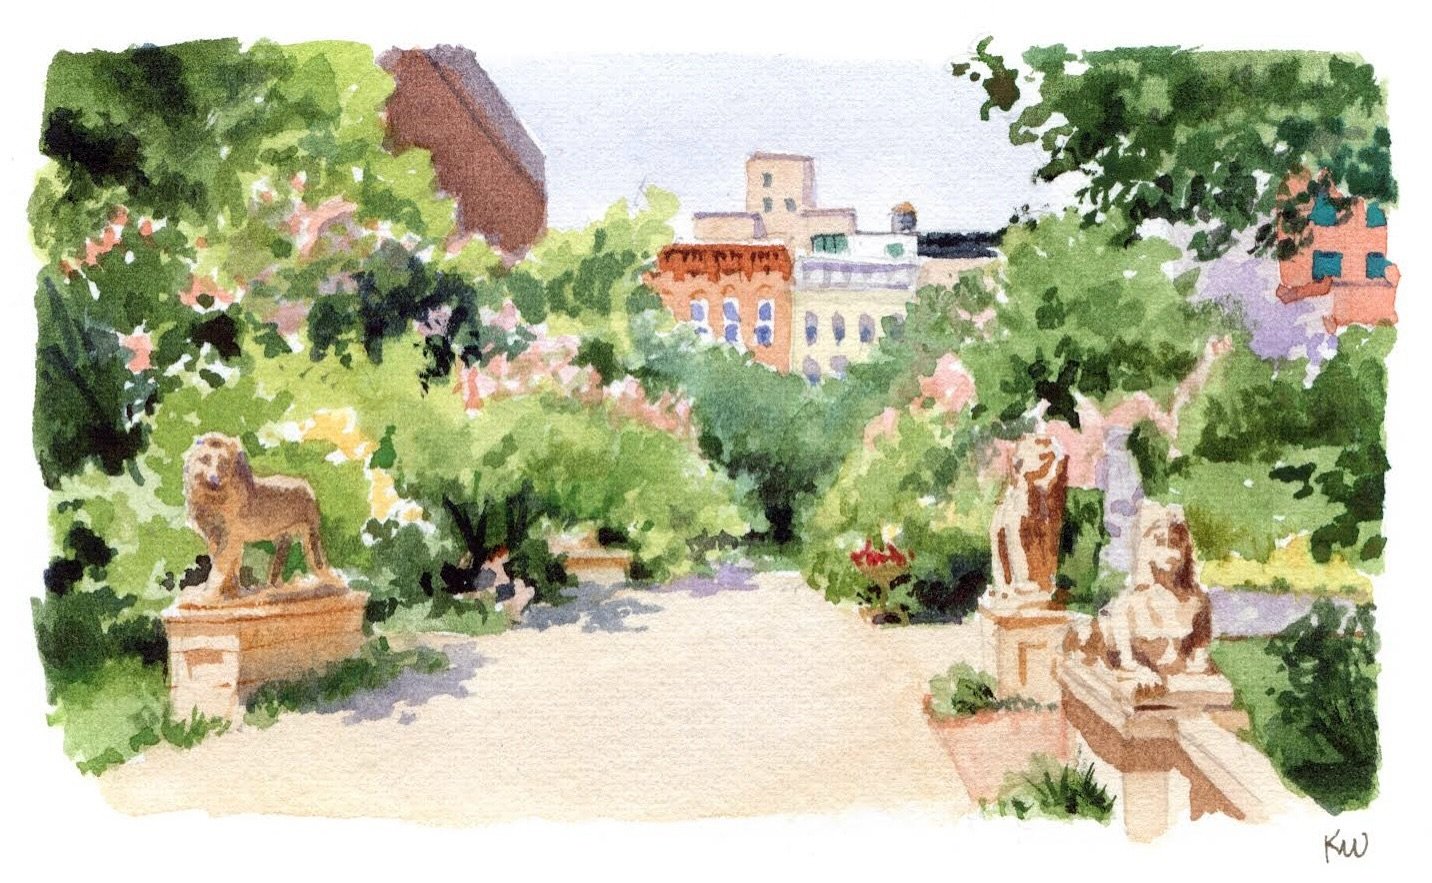 This week&rsquo;s featured work from our Call to Artists is a watercolor painting by @ramblingsketcher 

Submit your ESG-inspired work of any medium to art@elizabethstreetgarden.com #iArtESG